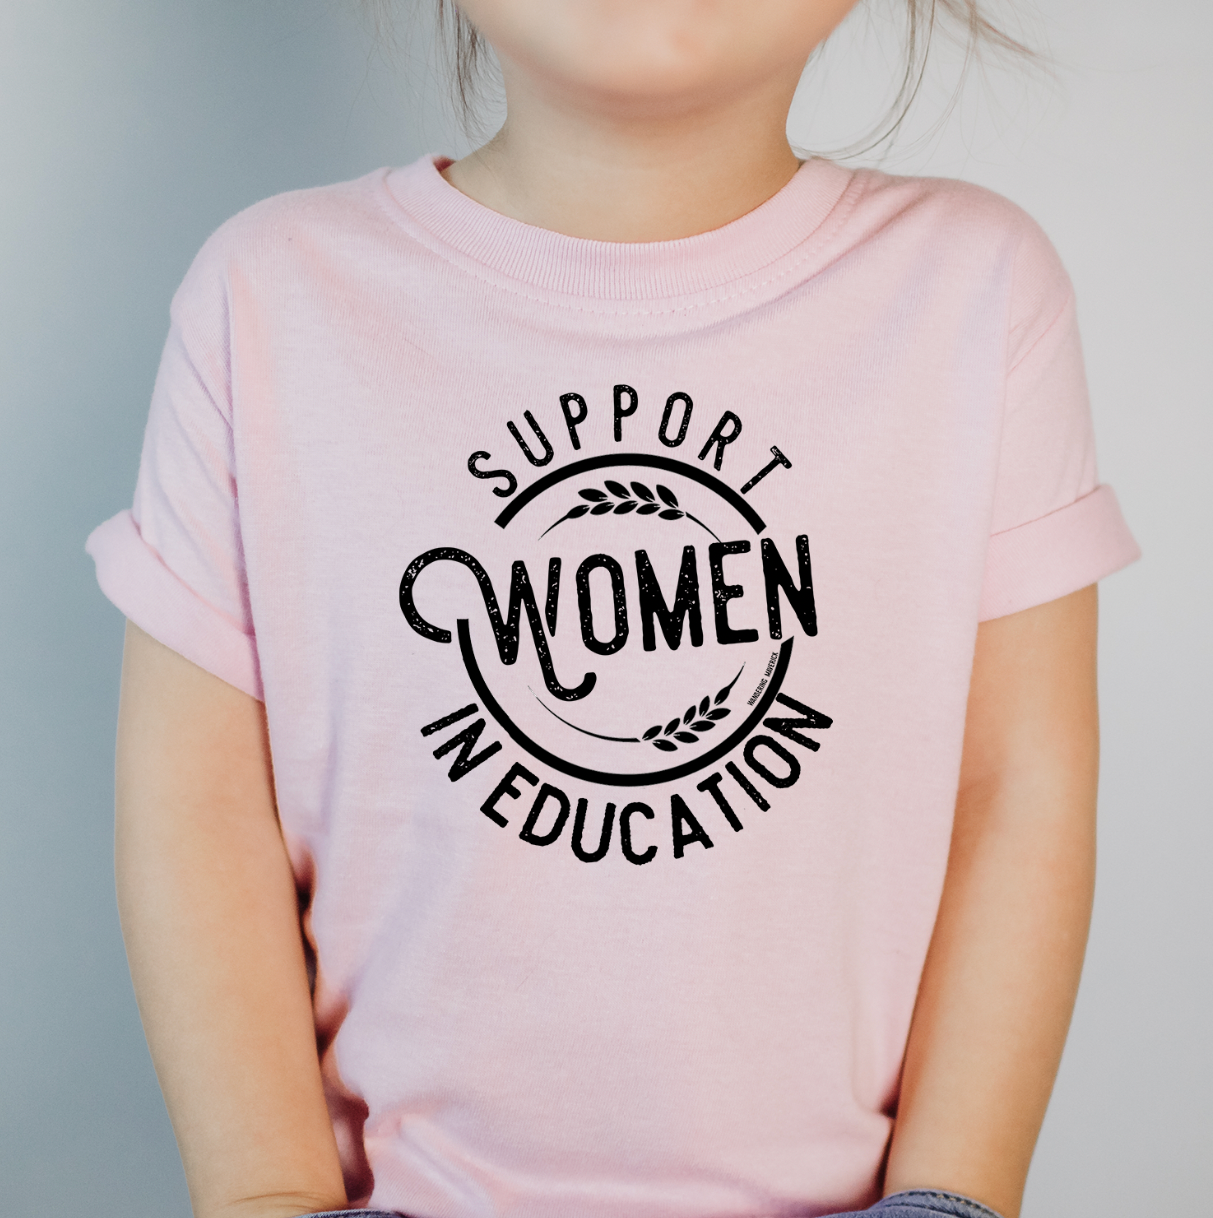 Support Women In Education One Piece/T-Shirt (Newborn - Youth XL) - Multiple Colors!